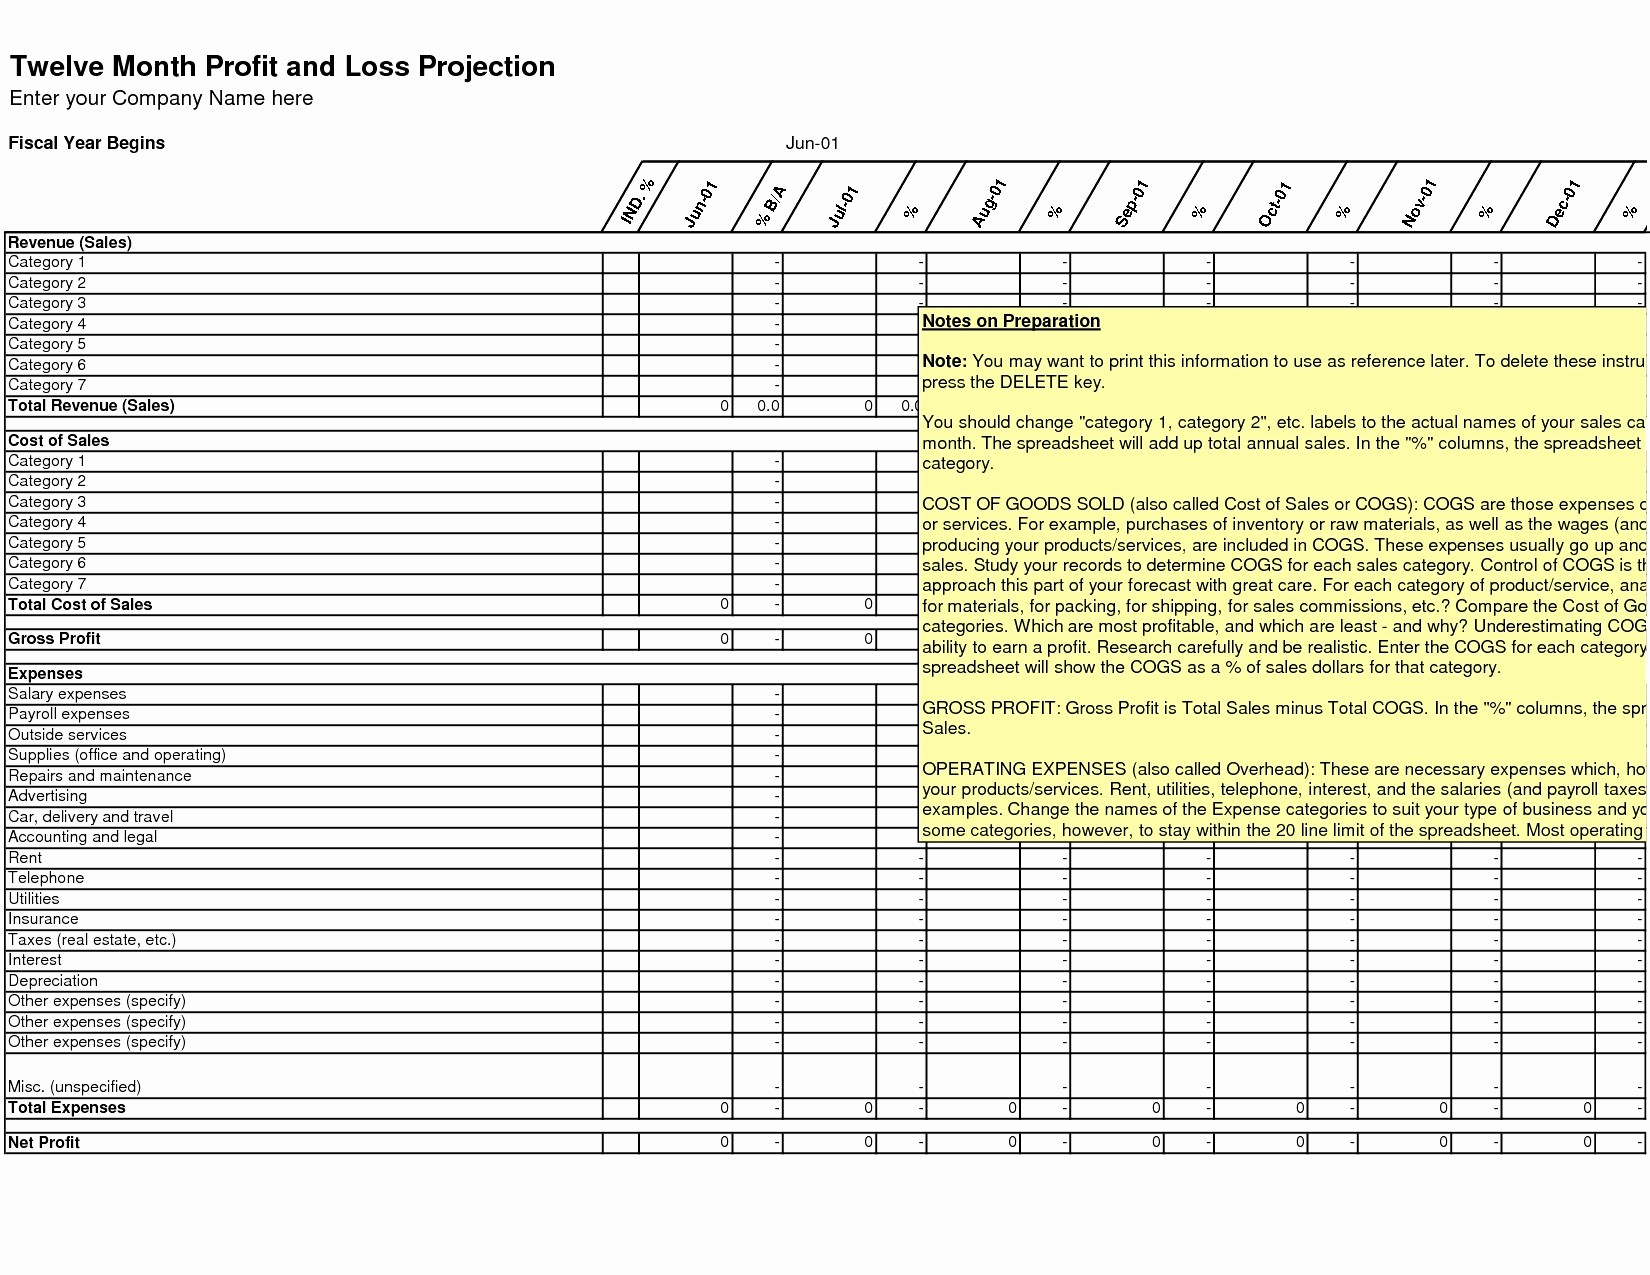 Sick Leave Accrual Spreadsheet New Document